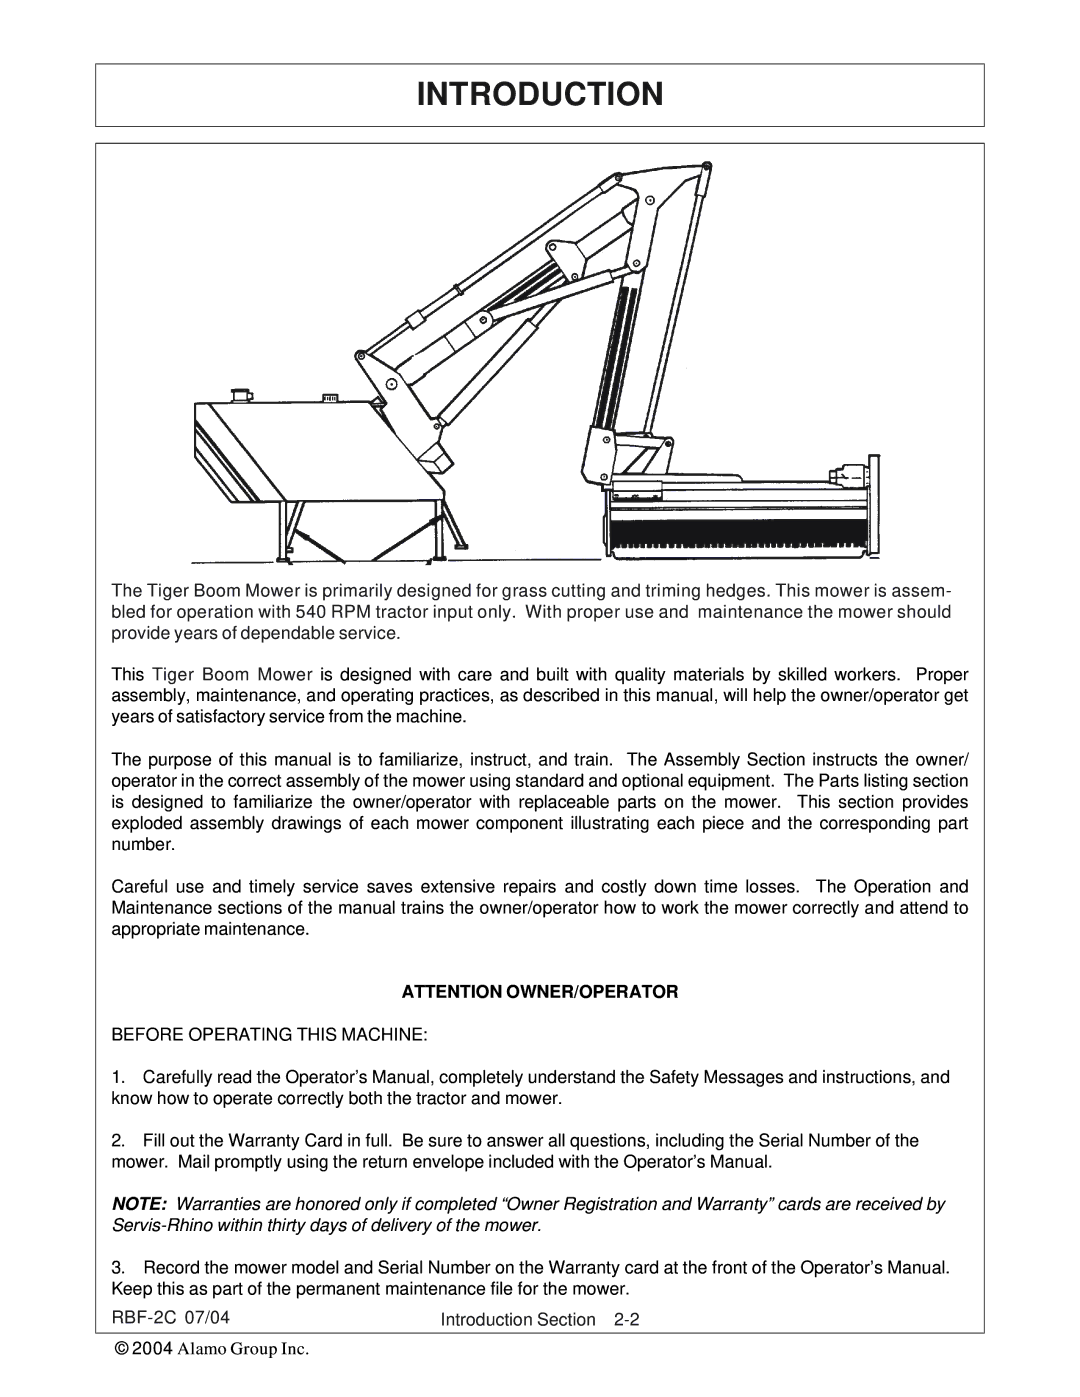 Tiger RBF-2C manual Introduction, Before Operating this Machine 